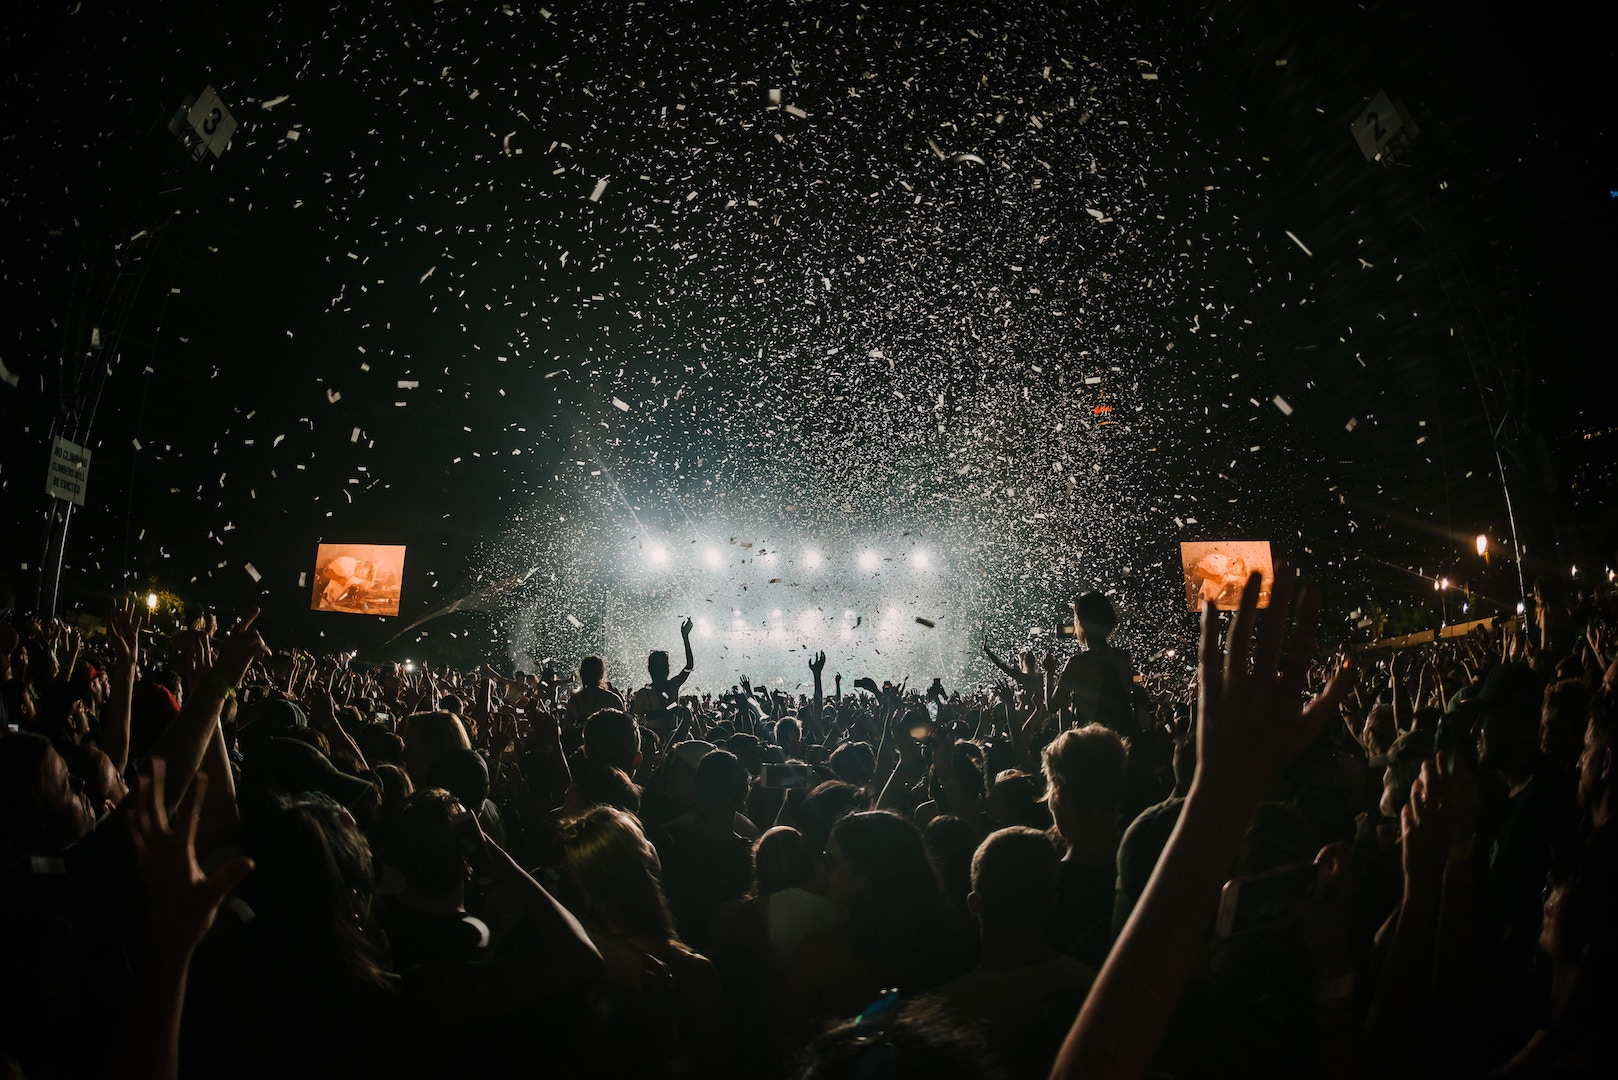 party, Photo by danny howe on Unsplash